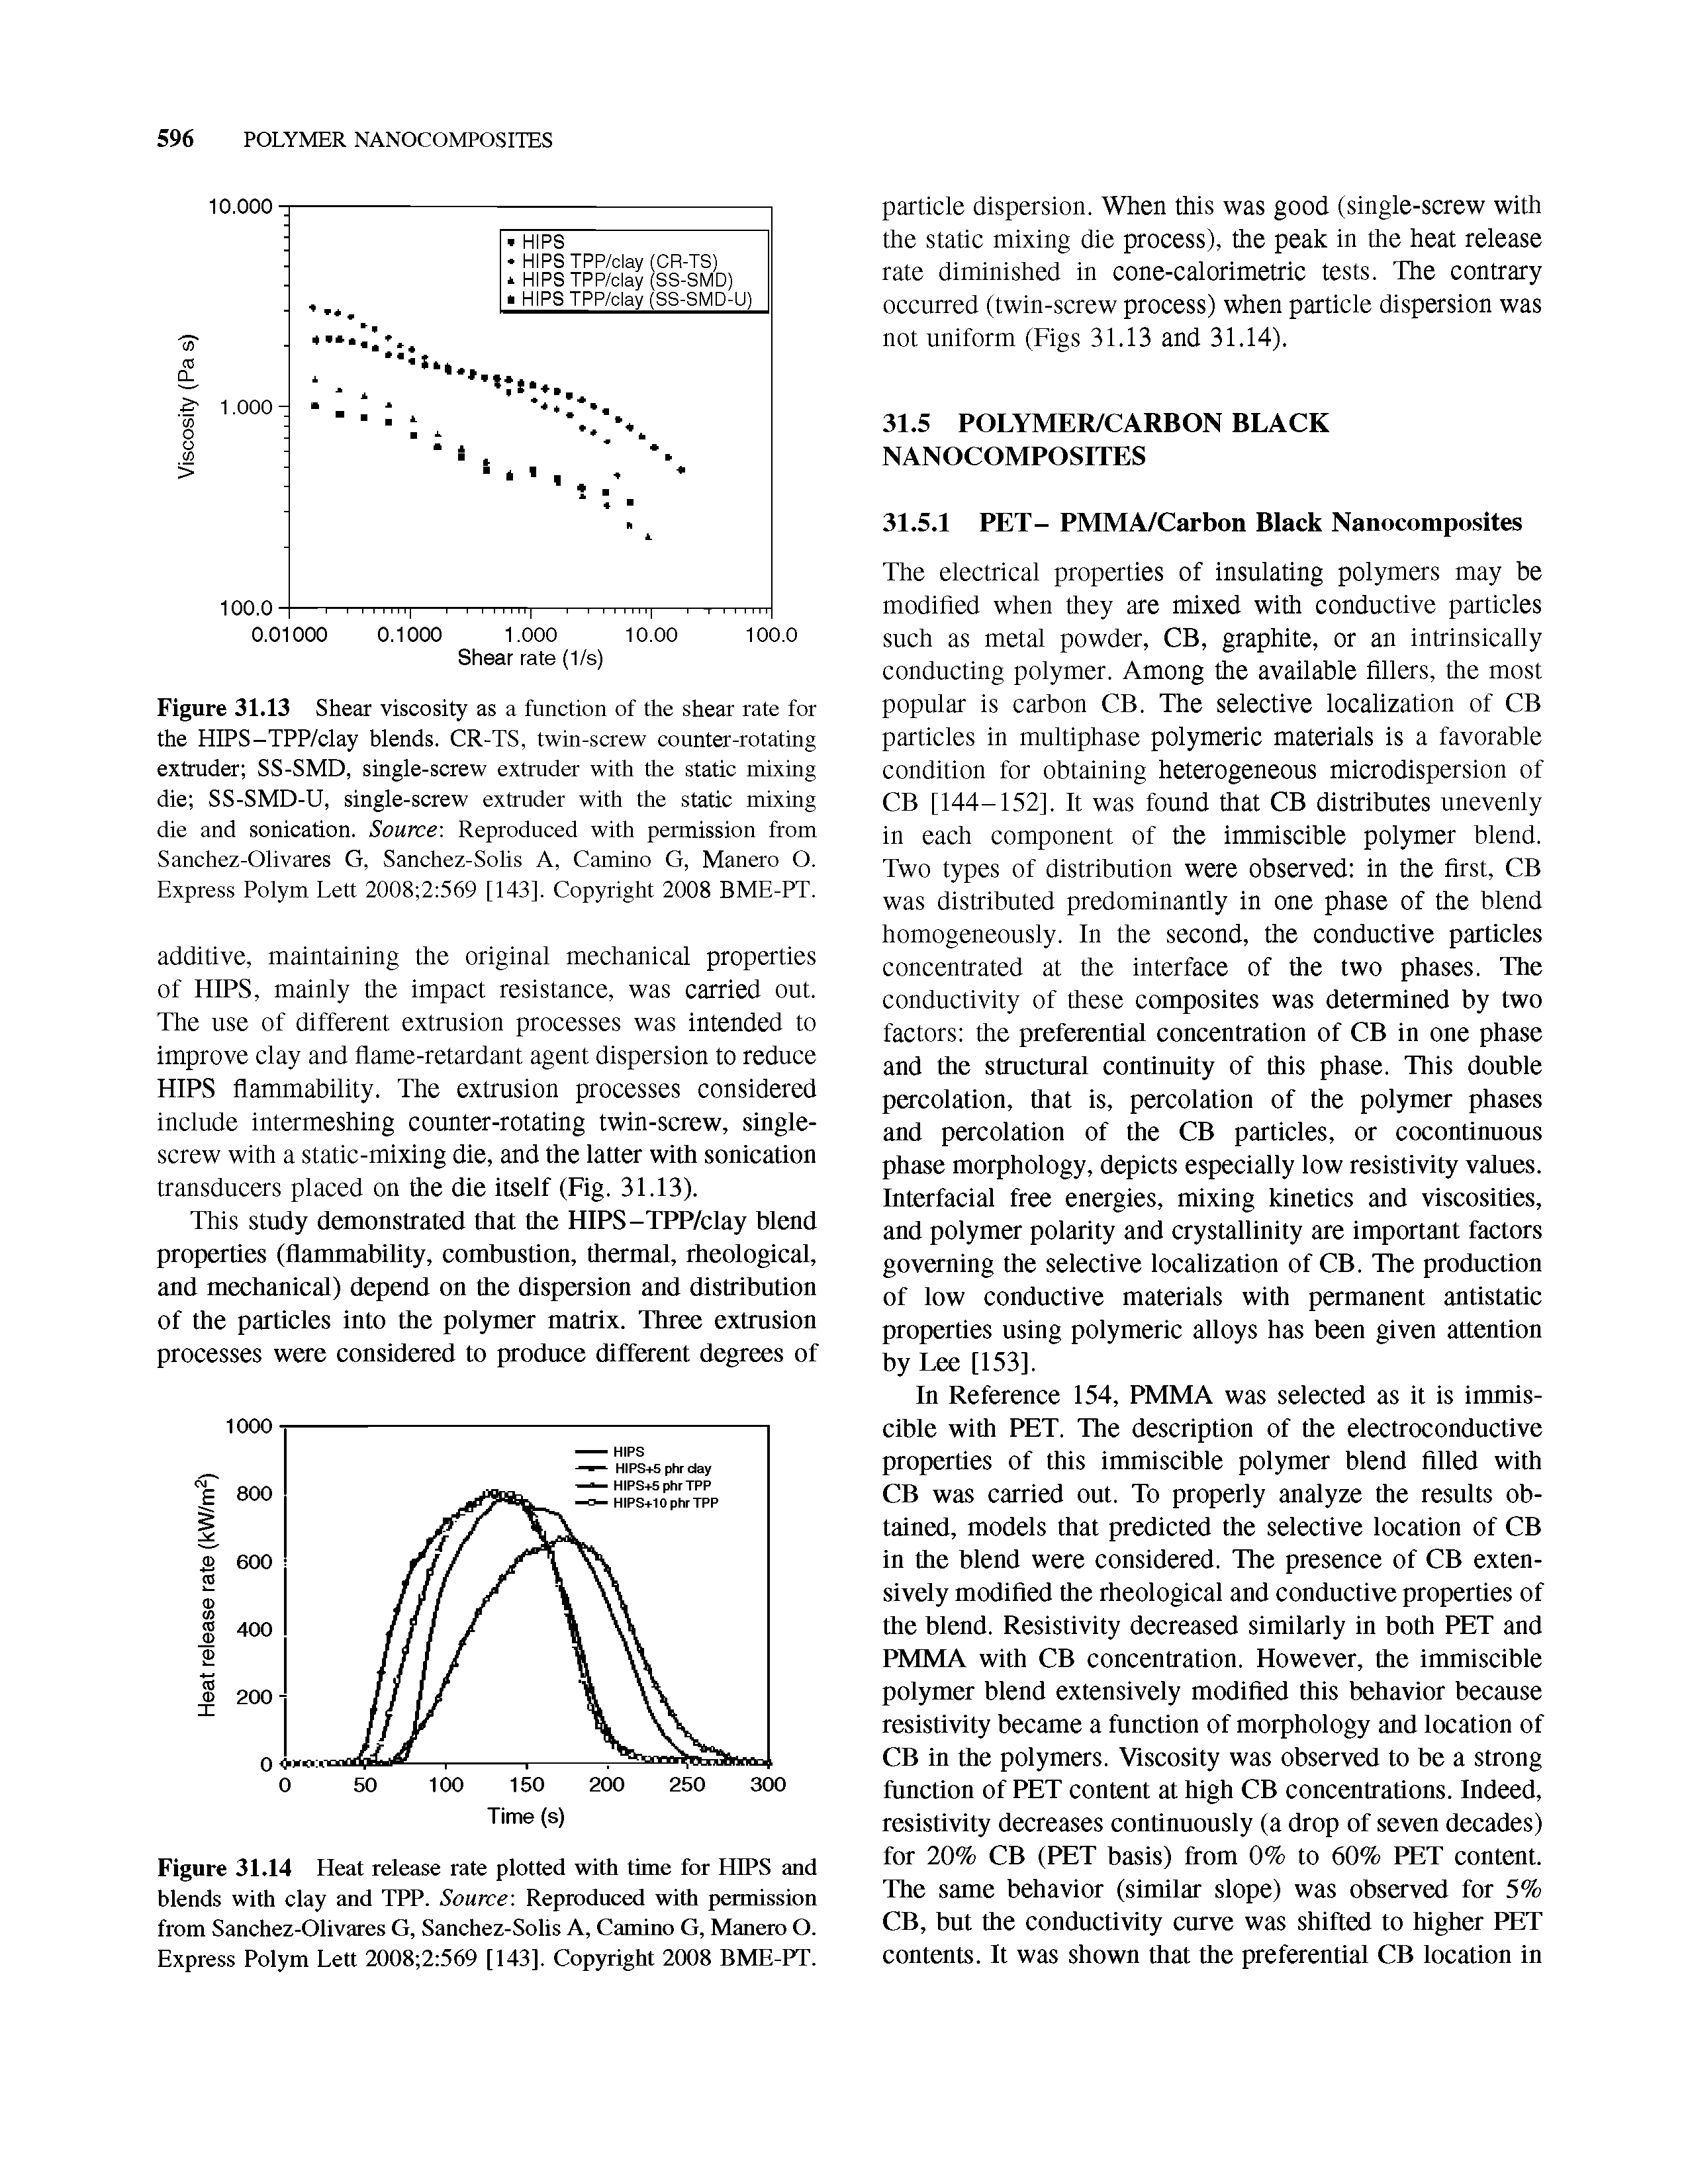 Figure 31.13 Shear viscosity as a function of the shear rate for the HIPS-TPP/clay blends. CR-TS, twin-screw counter-rotating extruder SS-SMD, single-screw extruder with the static mixing die SS-SMD-U, single-screw extruder with the static mixing die and sonication. Source Reproduced with permission from Sanchez-Olivares G, Sanchez-Solis A, Camino G, Manero O. Express Polym Lett 2008 2 569 [143]. Copyright 2008 BME-PT.